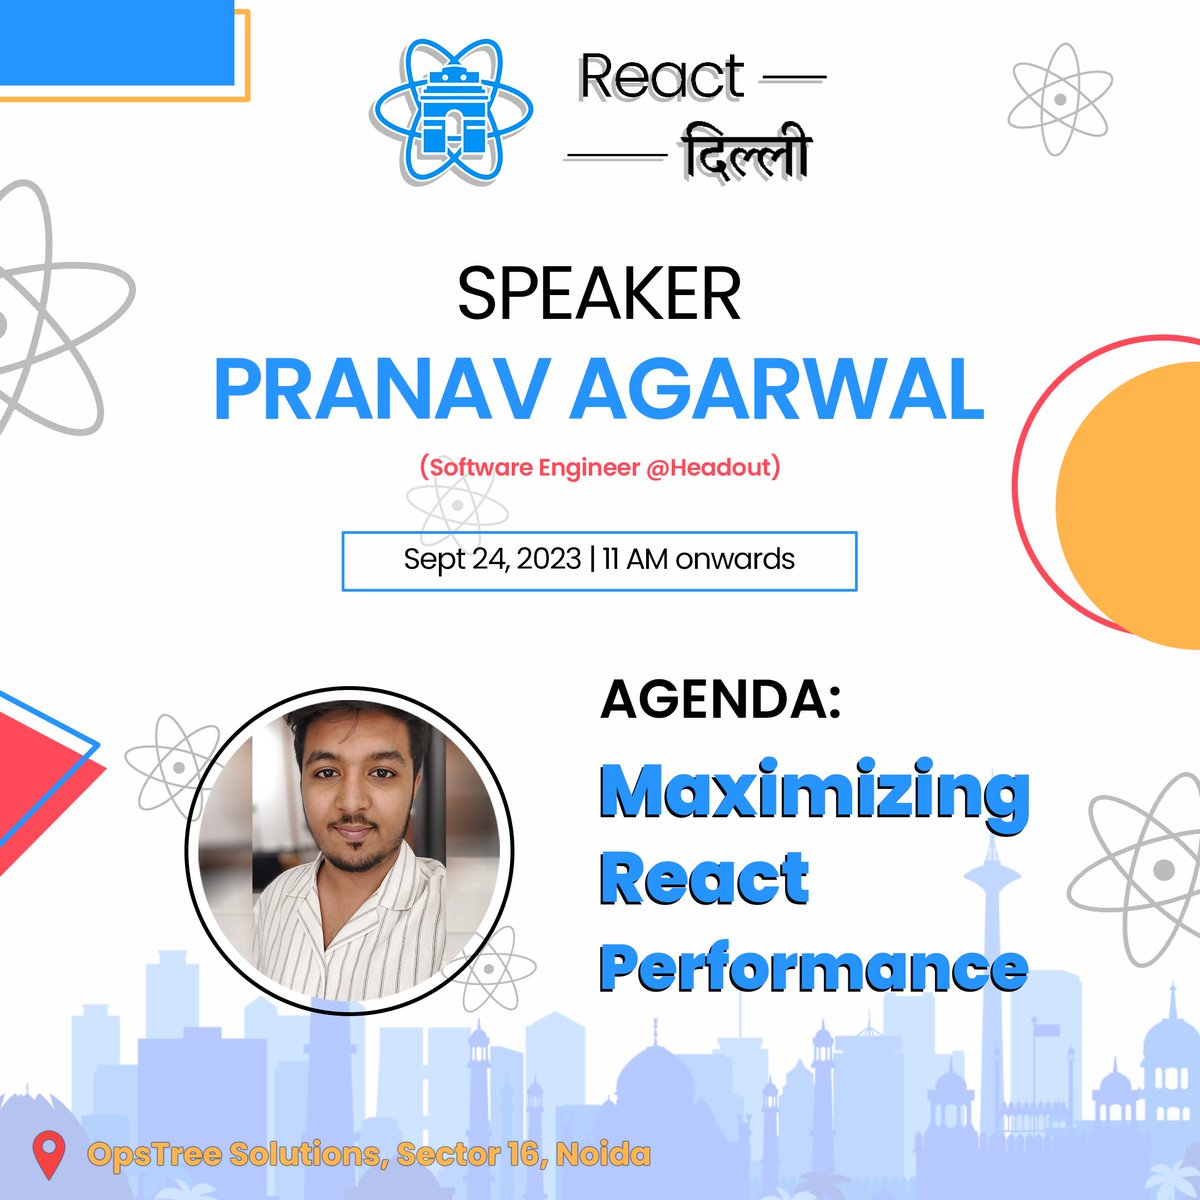 Excited to have @Pranav__agr as our second speaker at React Delhi Meetup#1! Join us for an enlightening session on optimizing and maximizing React performance. 🚀🔥 

#ReactDelhi #TechTalks #ReactDelhiNCR #TechMeetup #ReactJS #FrontEndDevelopment #GitHub #Networking #DelhiEvents